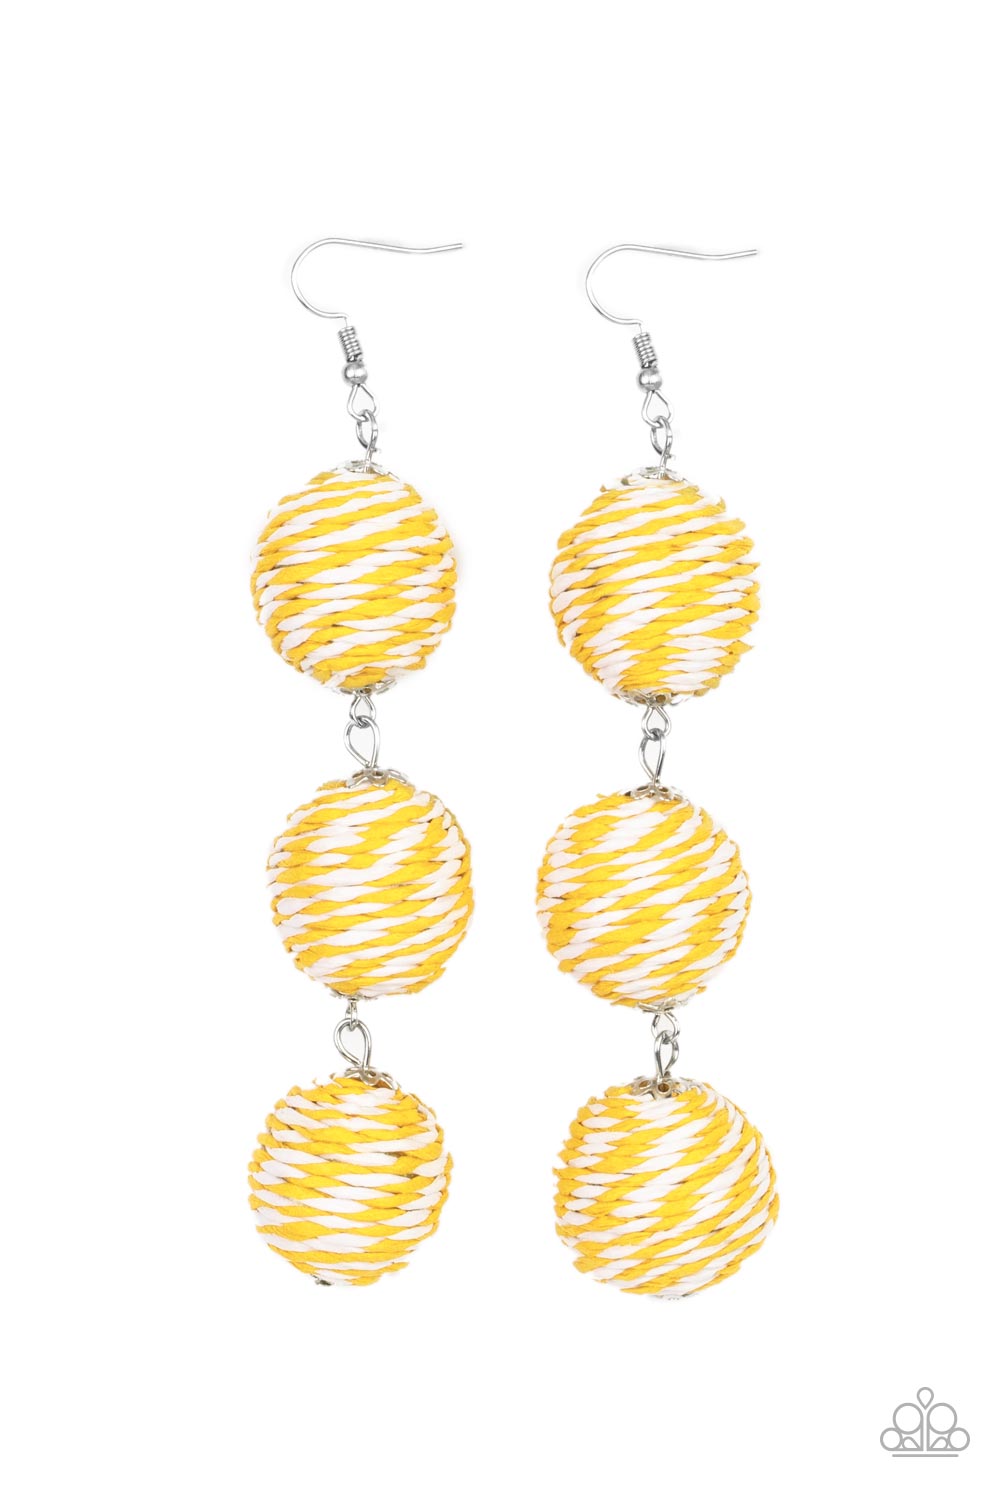 Laguna Lanterns Yellow Earring - Paparazzi Accessories  A woven collection of Illuminating and white crepe-like strings ornately wraps around three hanging beads, reminiscent of decorative party lanterns. Earring attaches to a standard fishhook fitting.  Sold as one pair of earrings.